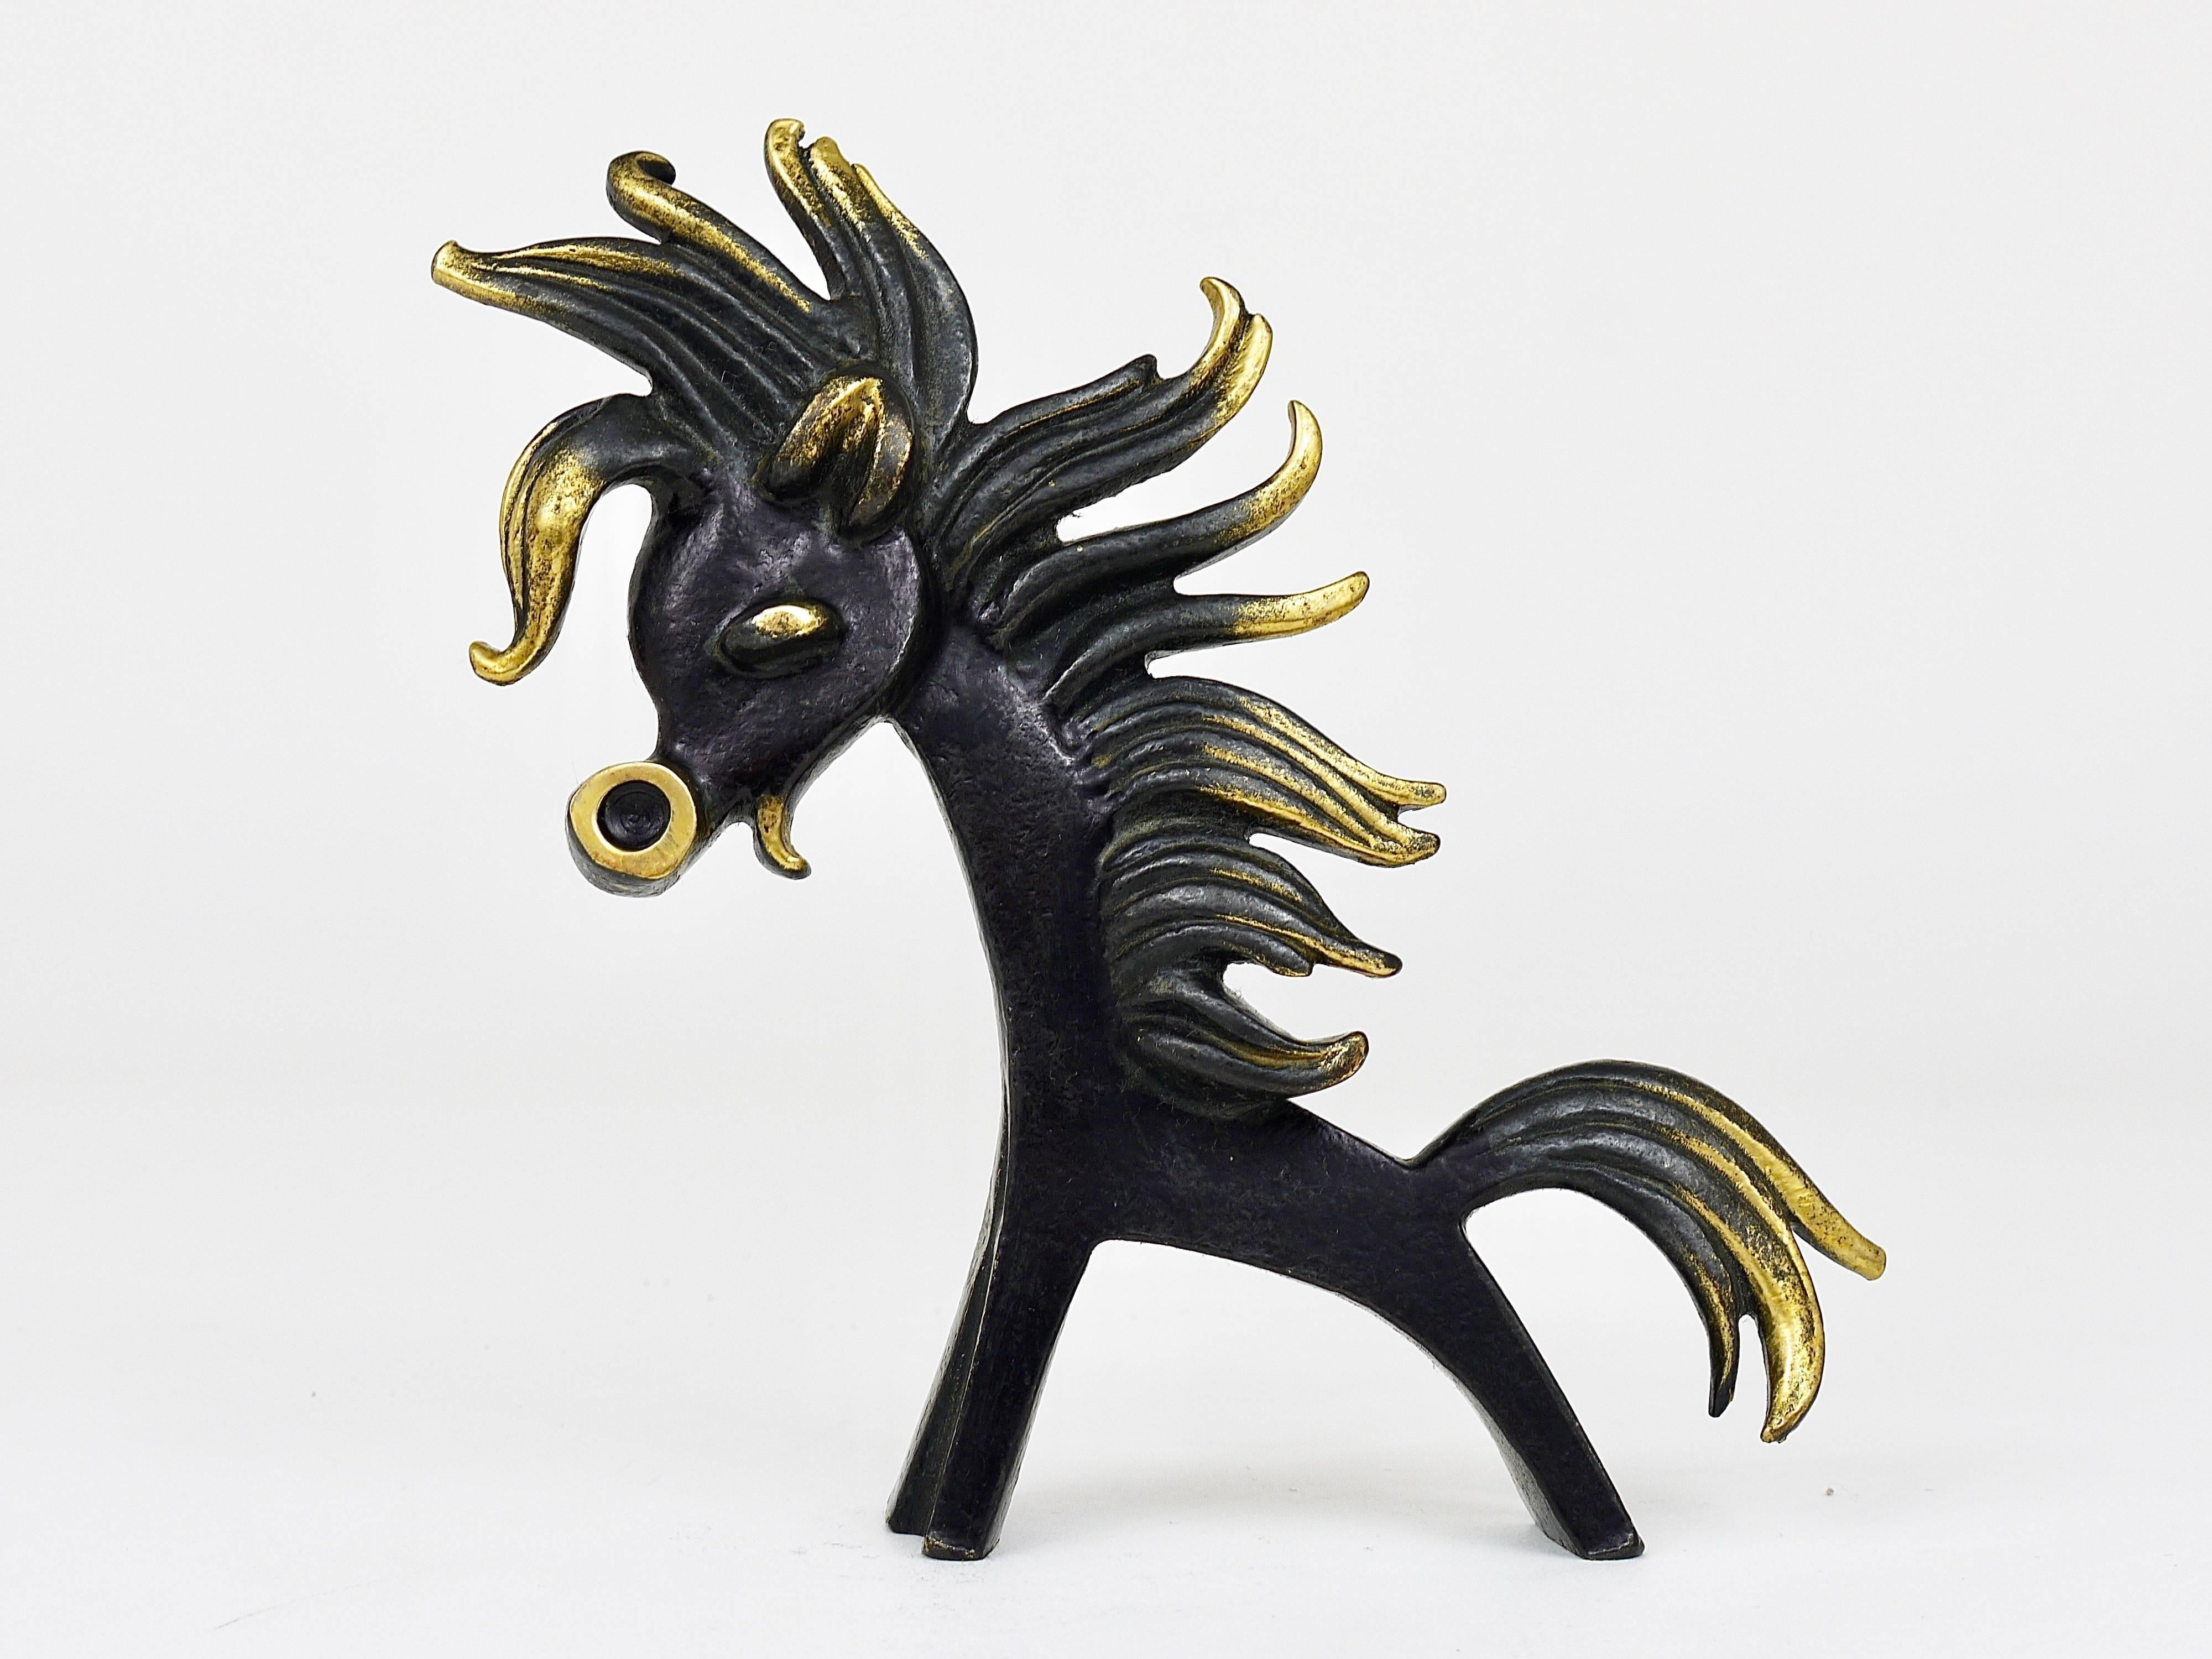 A charming, big and solid horse figurine, made of brass. A very humorous design by Walter Bosse, executed by Baller Austria in the 1950s. In very good condition with marginal patina.